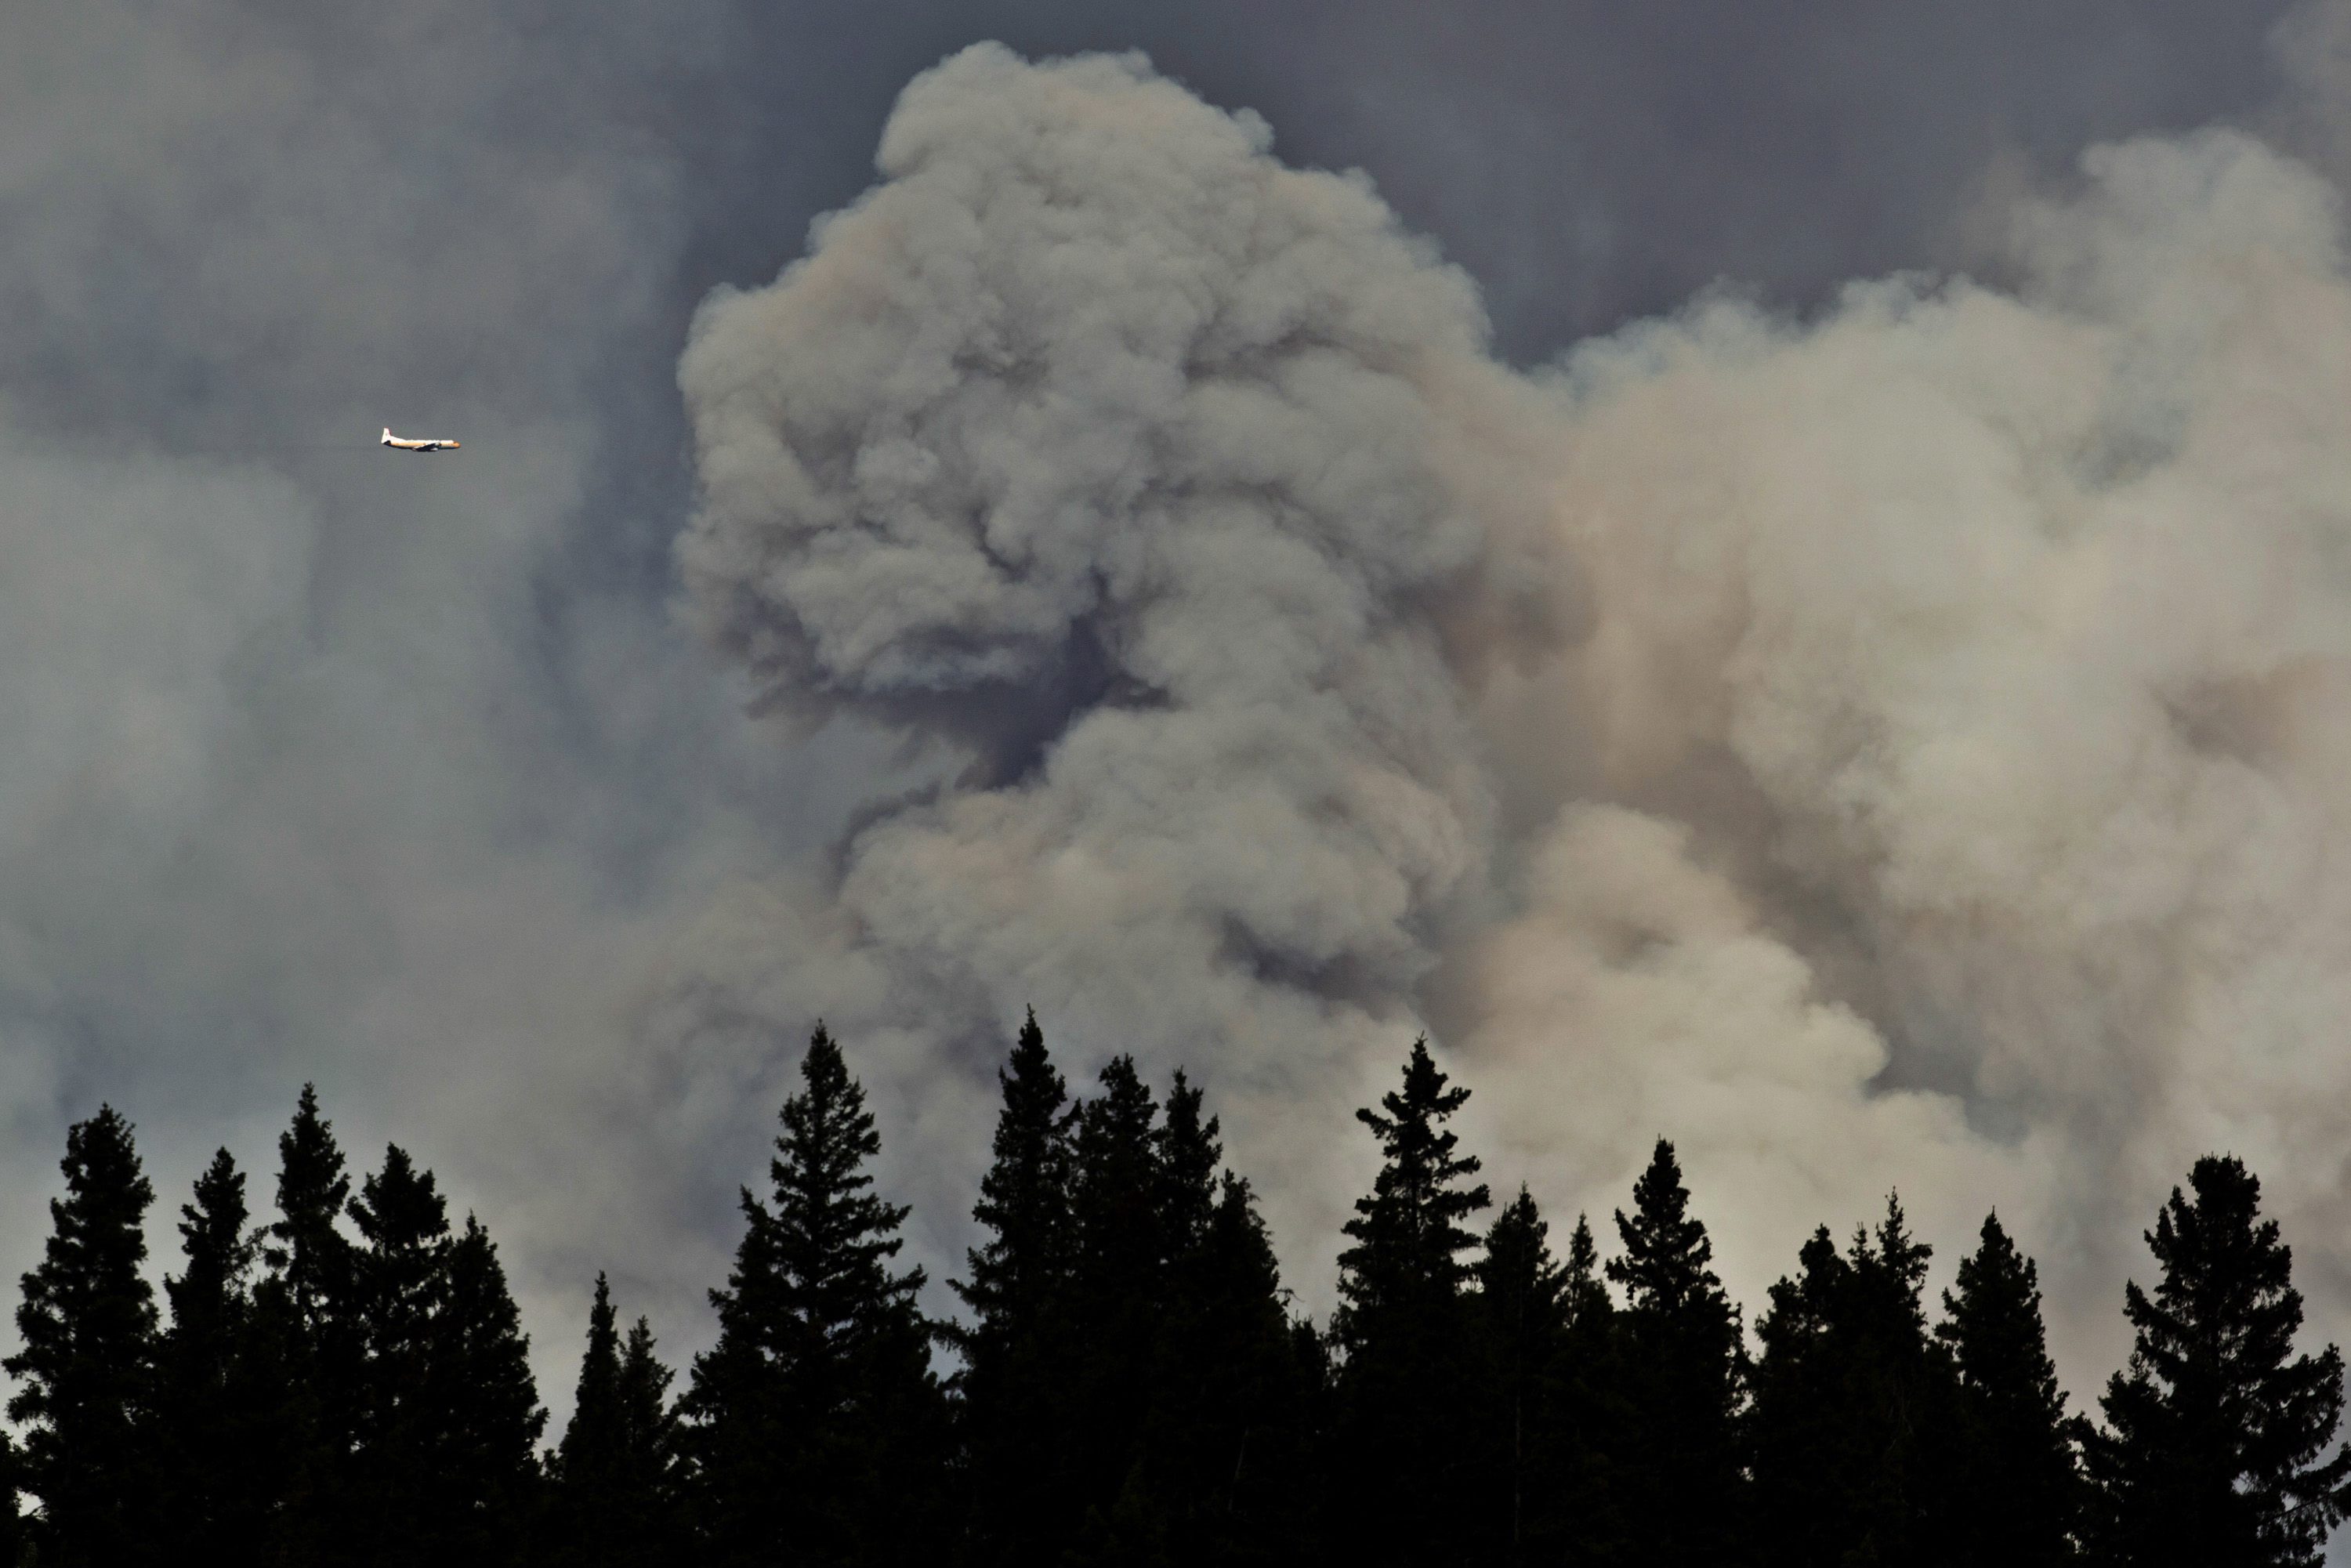 A plane surveys the area near a wildfire in Fort McMurray, Alberta, on Thursday, May 5, 2016. An ever-changing, volatile situation is fraying the nerves of residents and officials alike as a massive wildfire continues to bear down on the Fort McMurray area of northern Alberta. The province of Alberta declared a state of emergency. (Jason Franson/The Canadian Press via AP) MANDATORY CREDIT